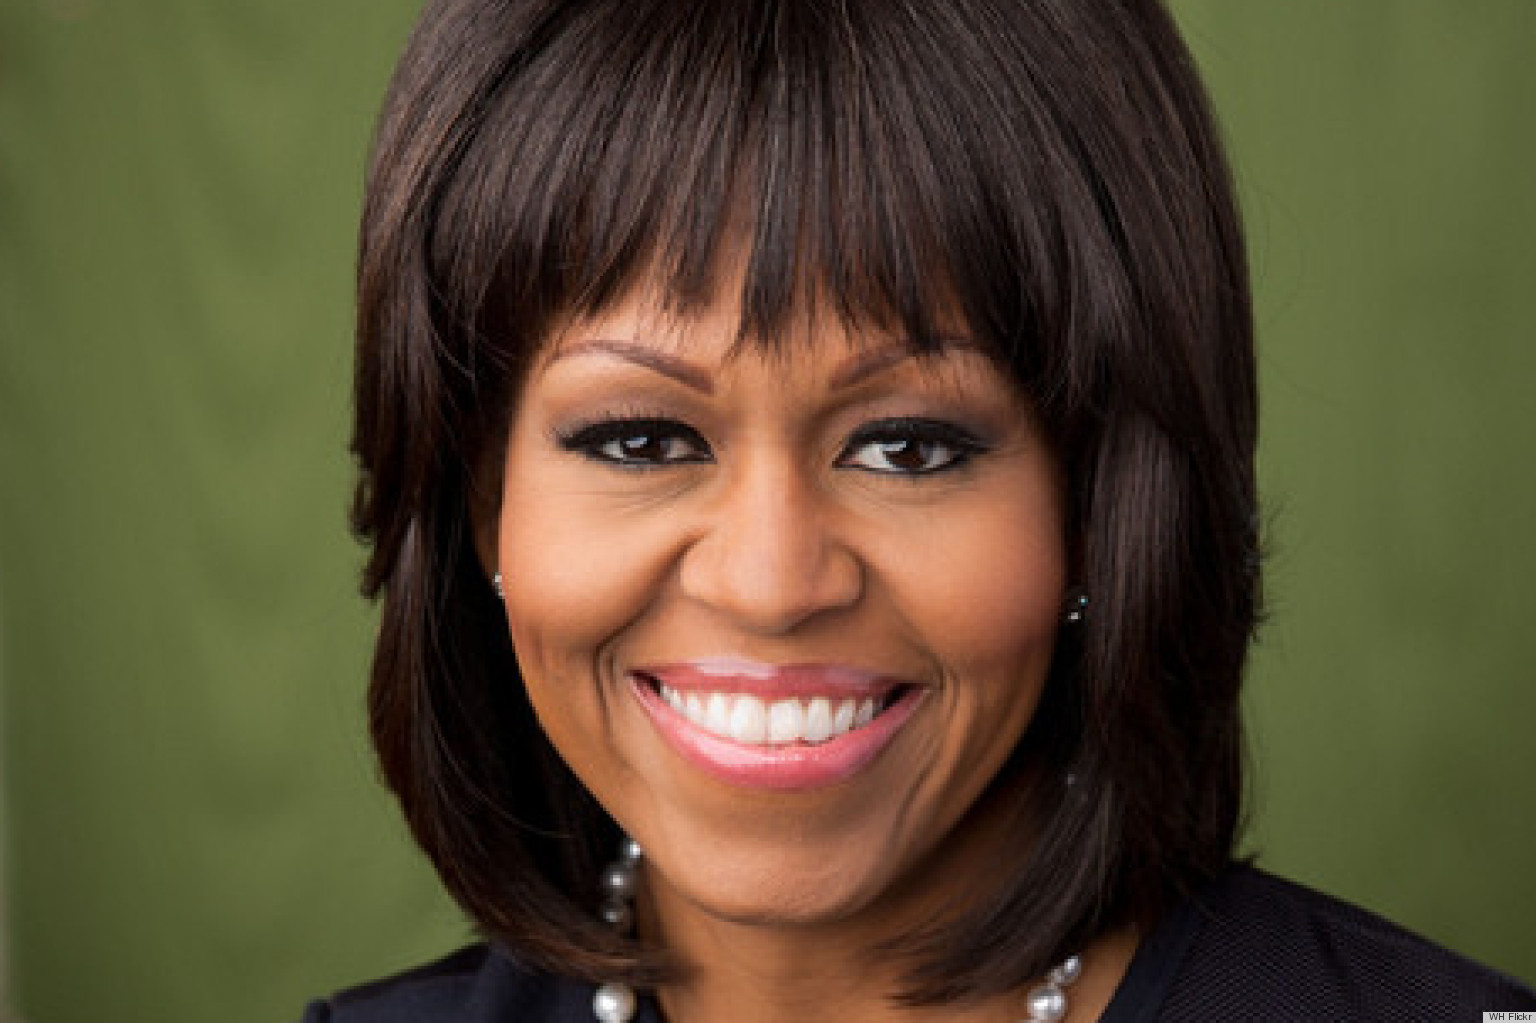 Michelle Obama’s Classic Cut Top 10 Most Popular Female Celebrity Hairstyles of all Time - Hit List